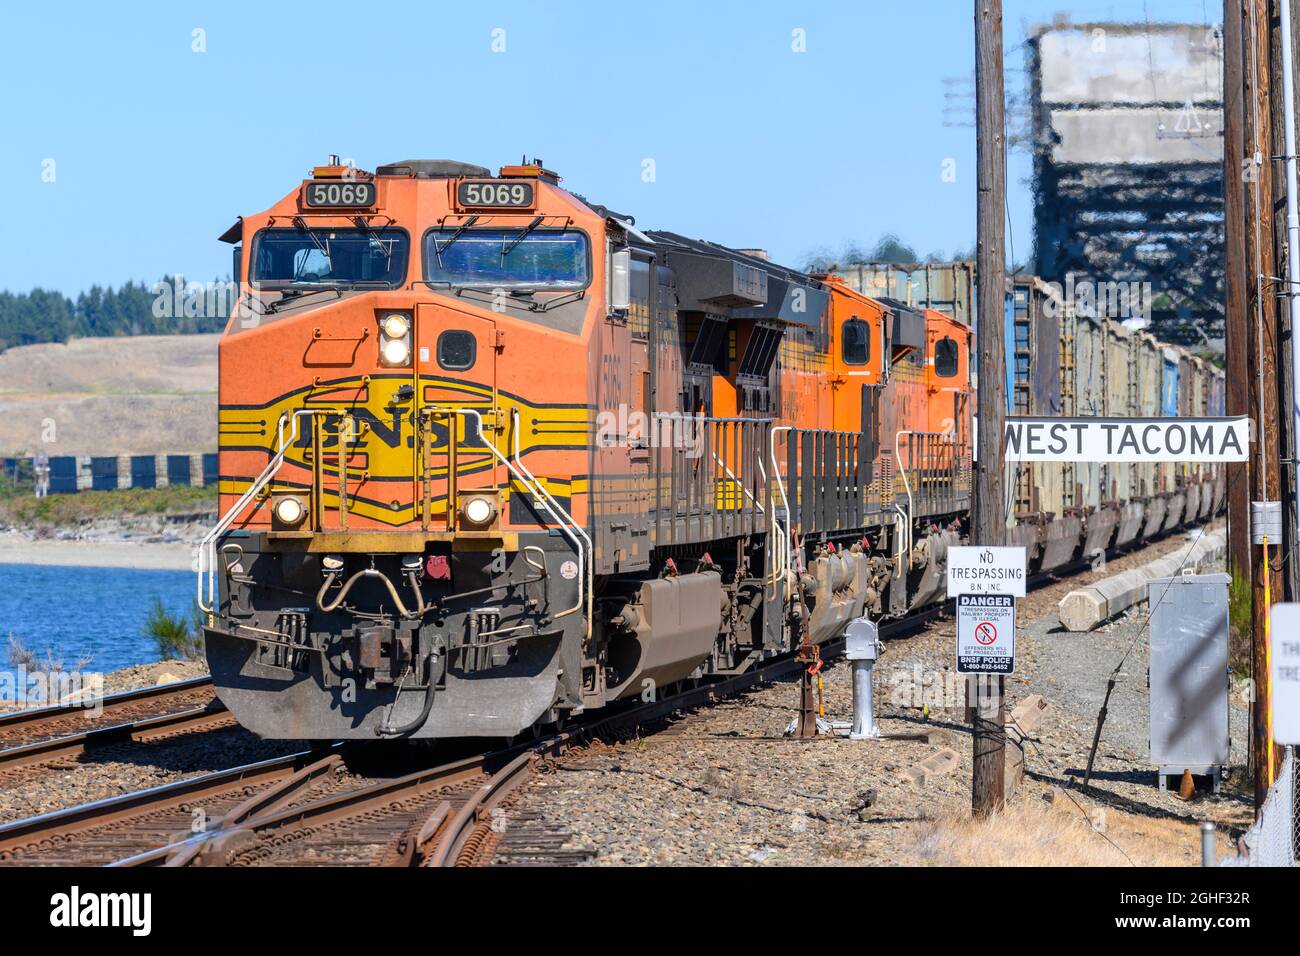 A BNSF municipal waste train from Tacoma after crossing Chamber Creek on Bridge 14, head south to a landfill near Roosevelt, WA Stock Photo